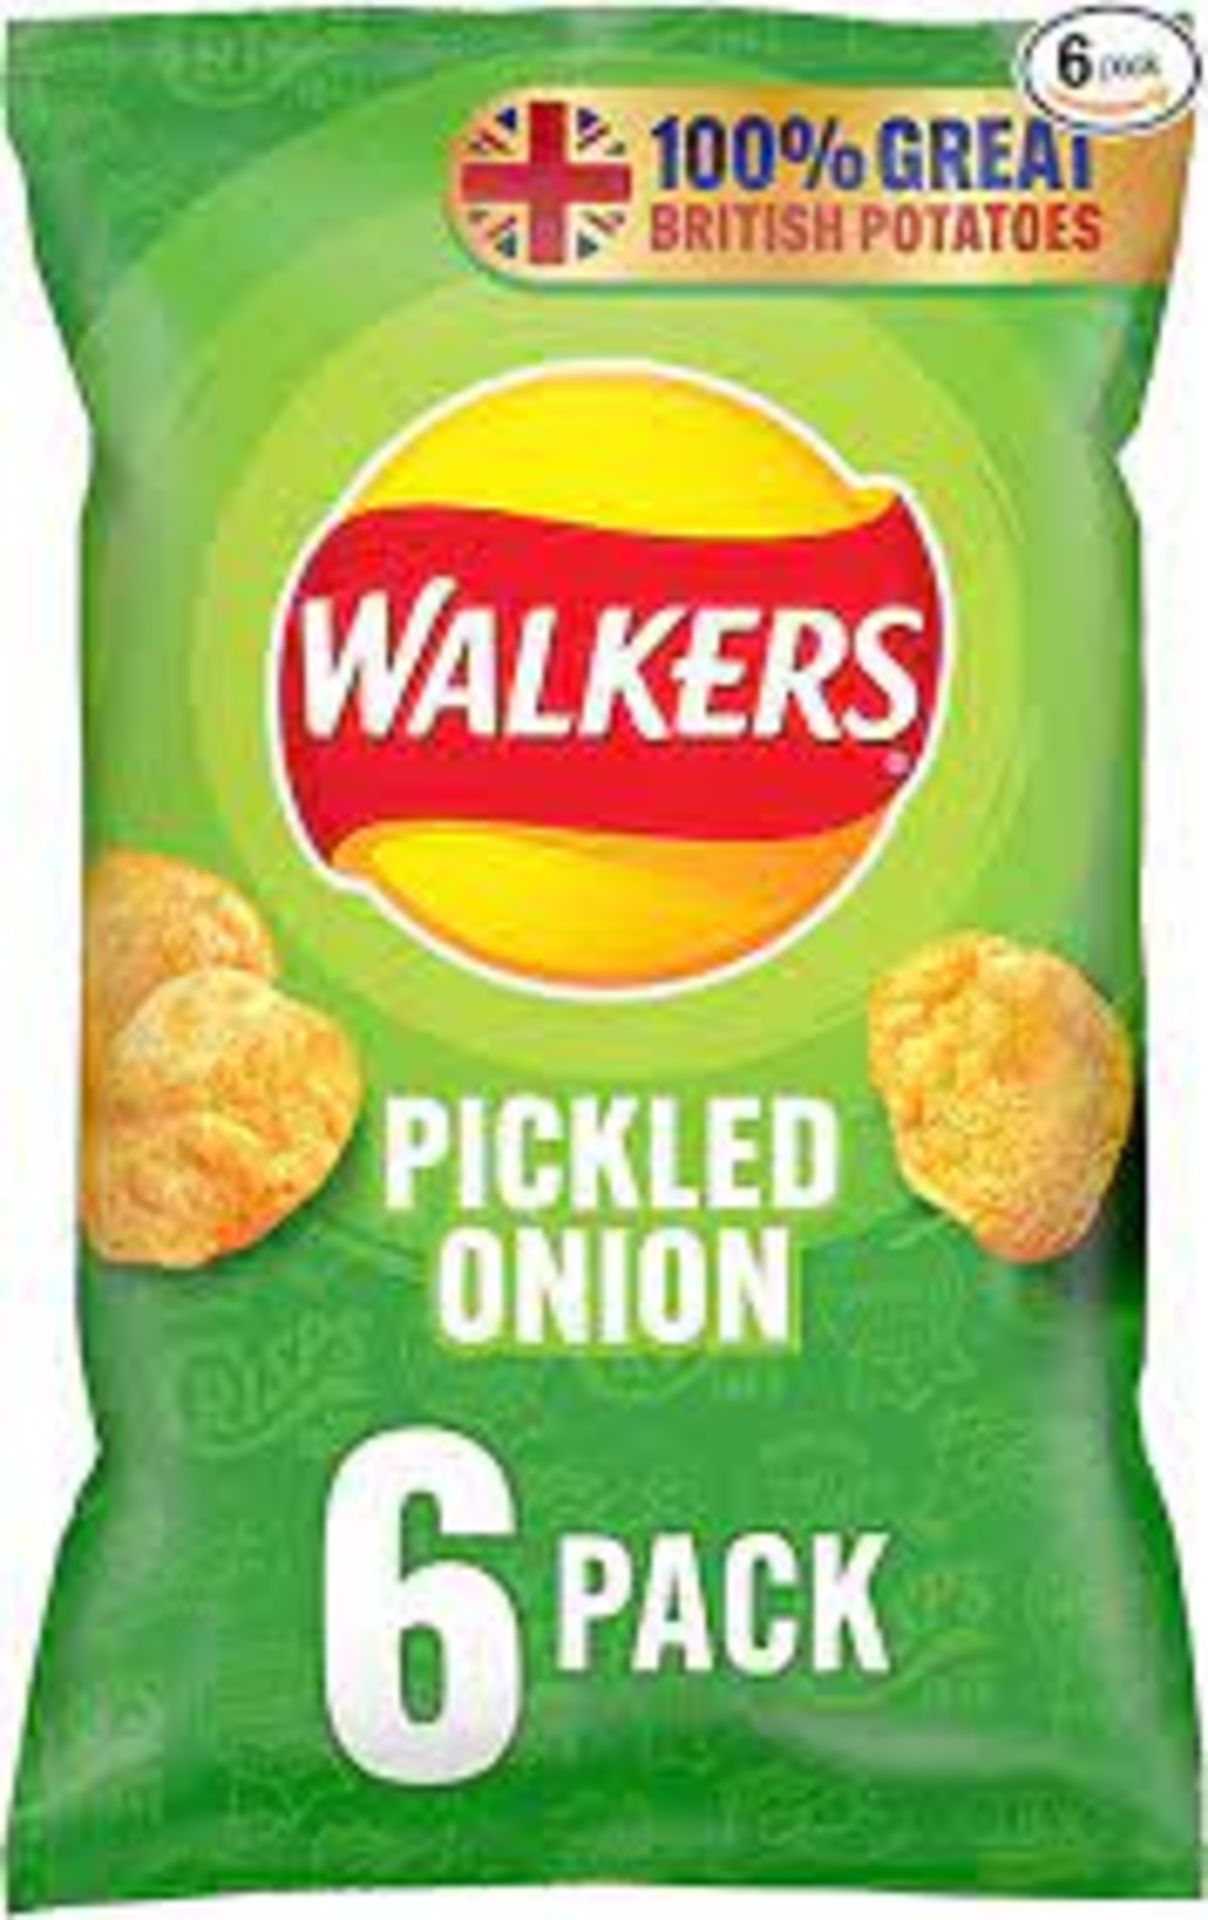 RRP £713 Spw29R4217E (Approx. Count) 51 X Walkers Pickled Onion Multipack Crisps, 6 X 25G 30 X